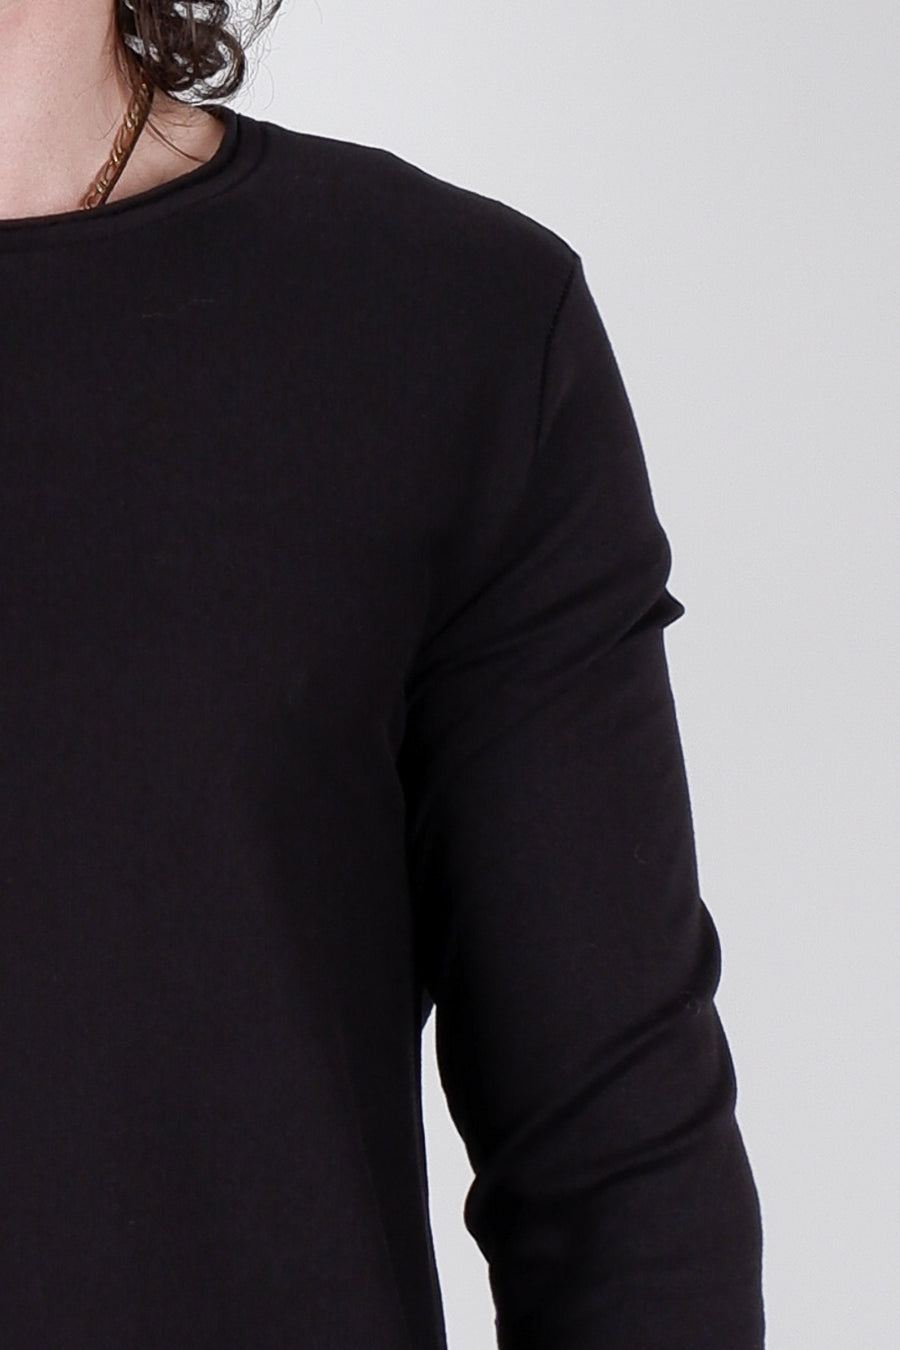 Buy the Hannes Roether Raw Neck Cotton L/S T-Shirt in Black at Intro. Spend £50 for free UK delivery. Official stockists. We ship worldwide.